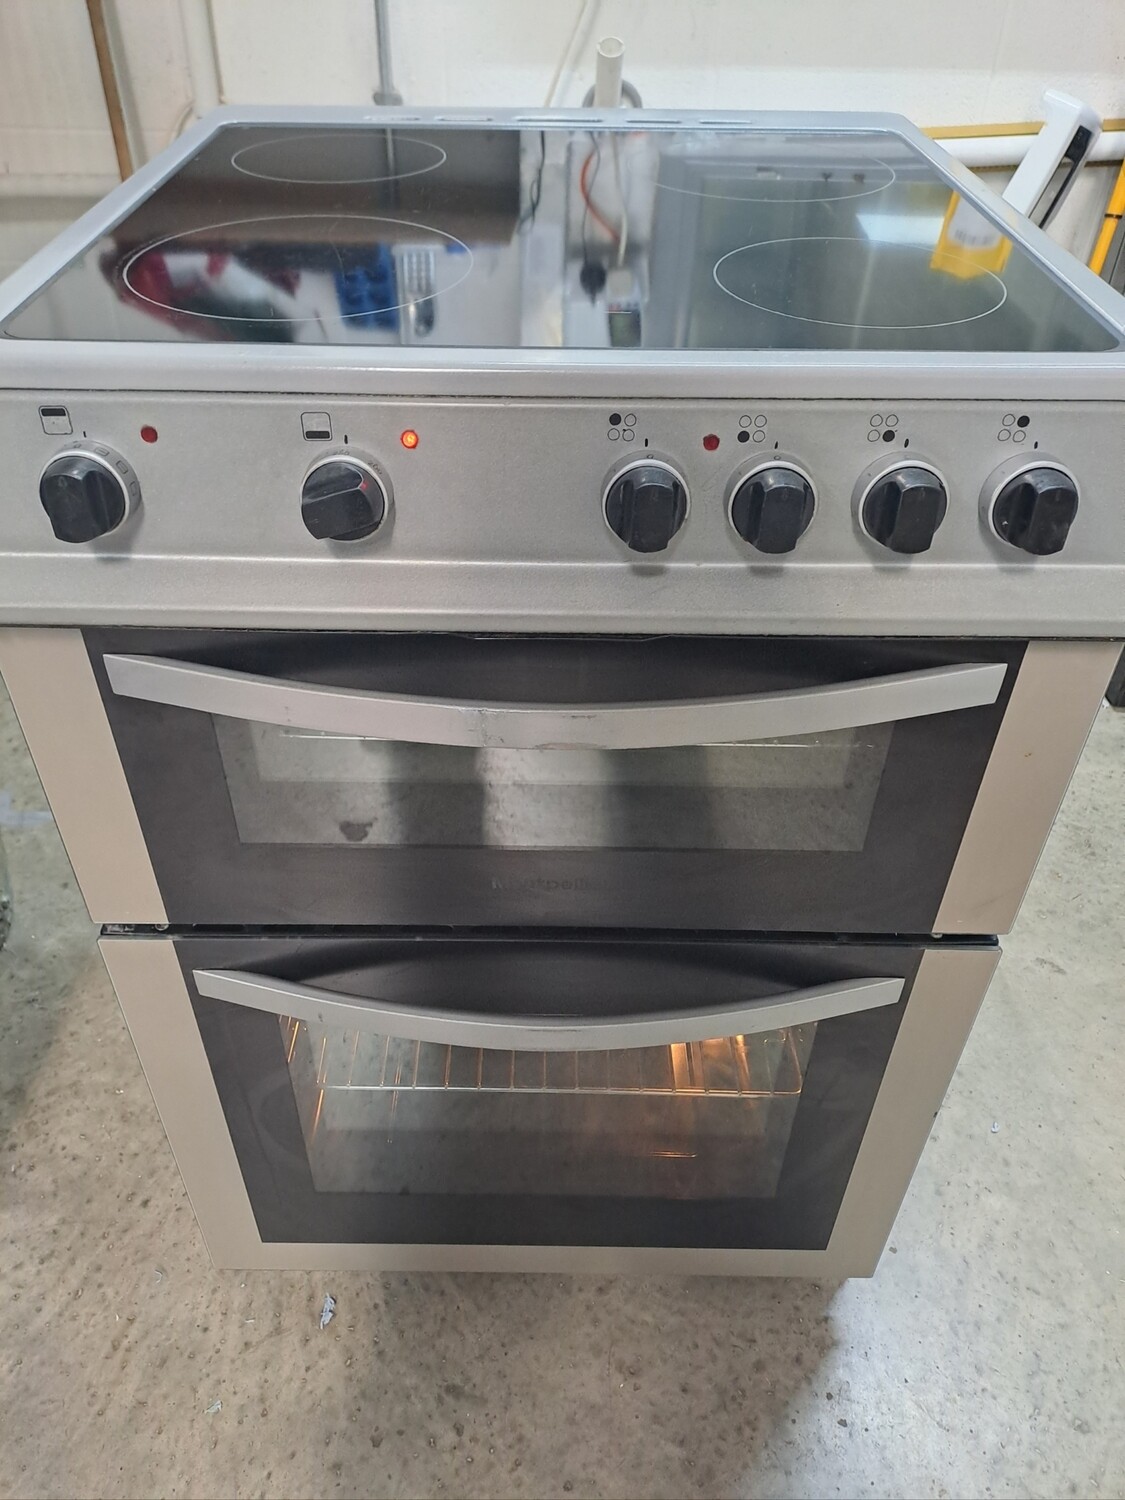 Montpellier MDC600FS 60cm Electric cooker Twin Cavity Double Oven Ceramic Hob - Silver - Refurbished + 6 month guarantee. This item is located at our Whitby Road Shop